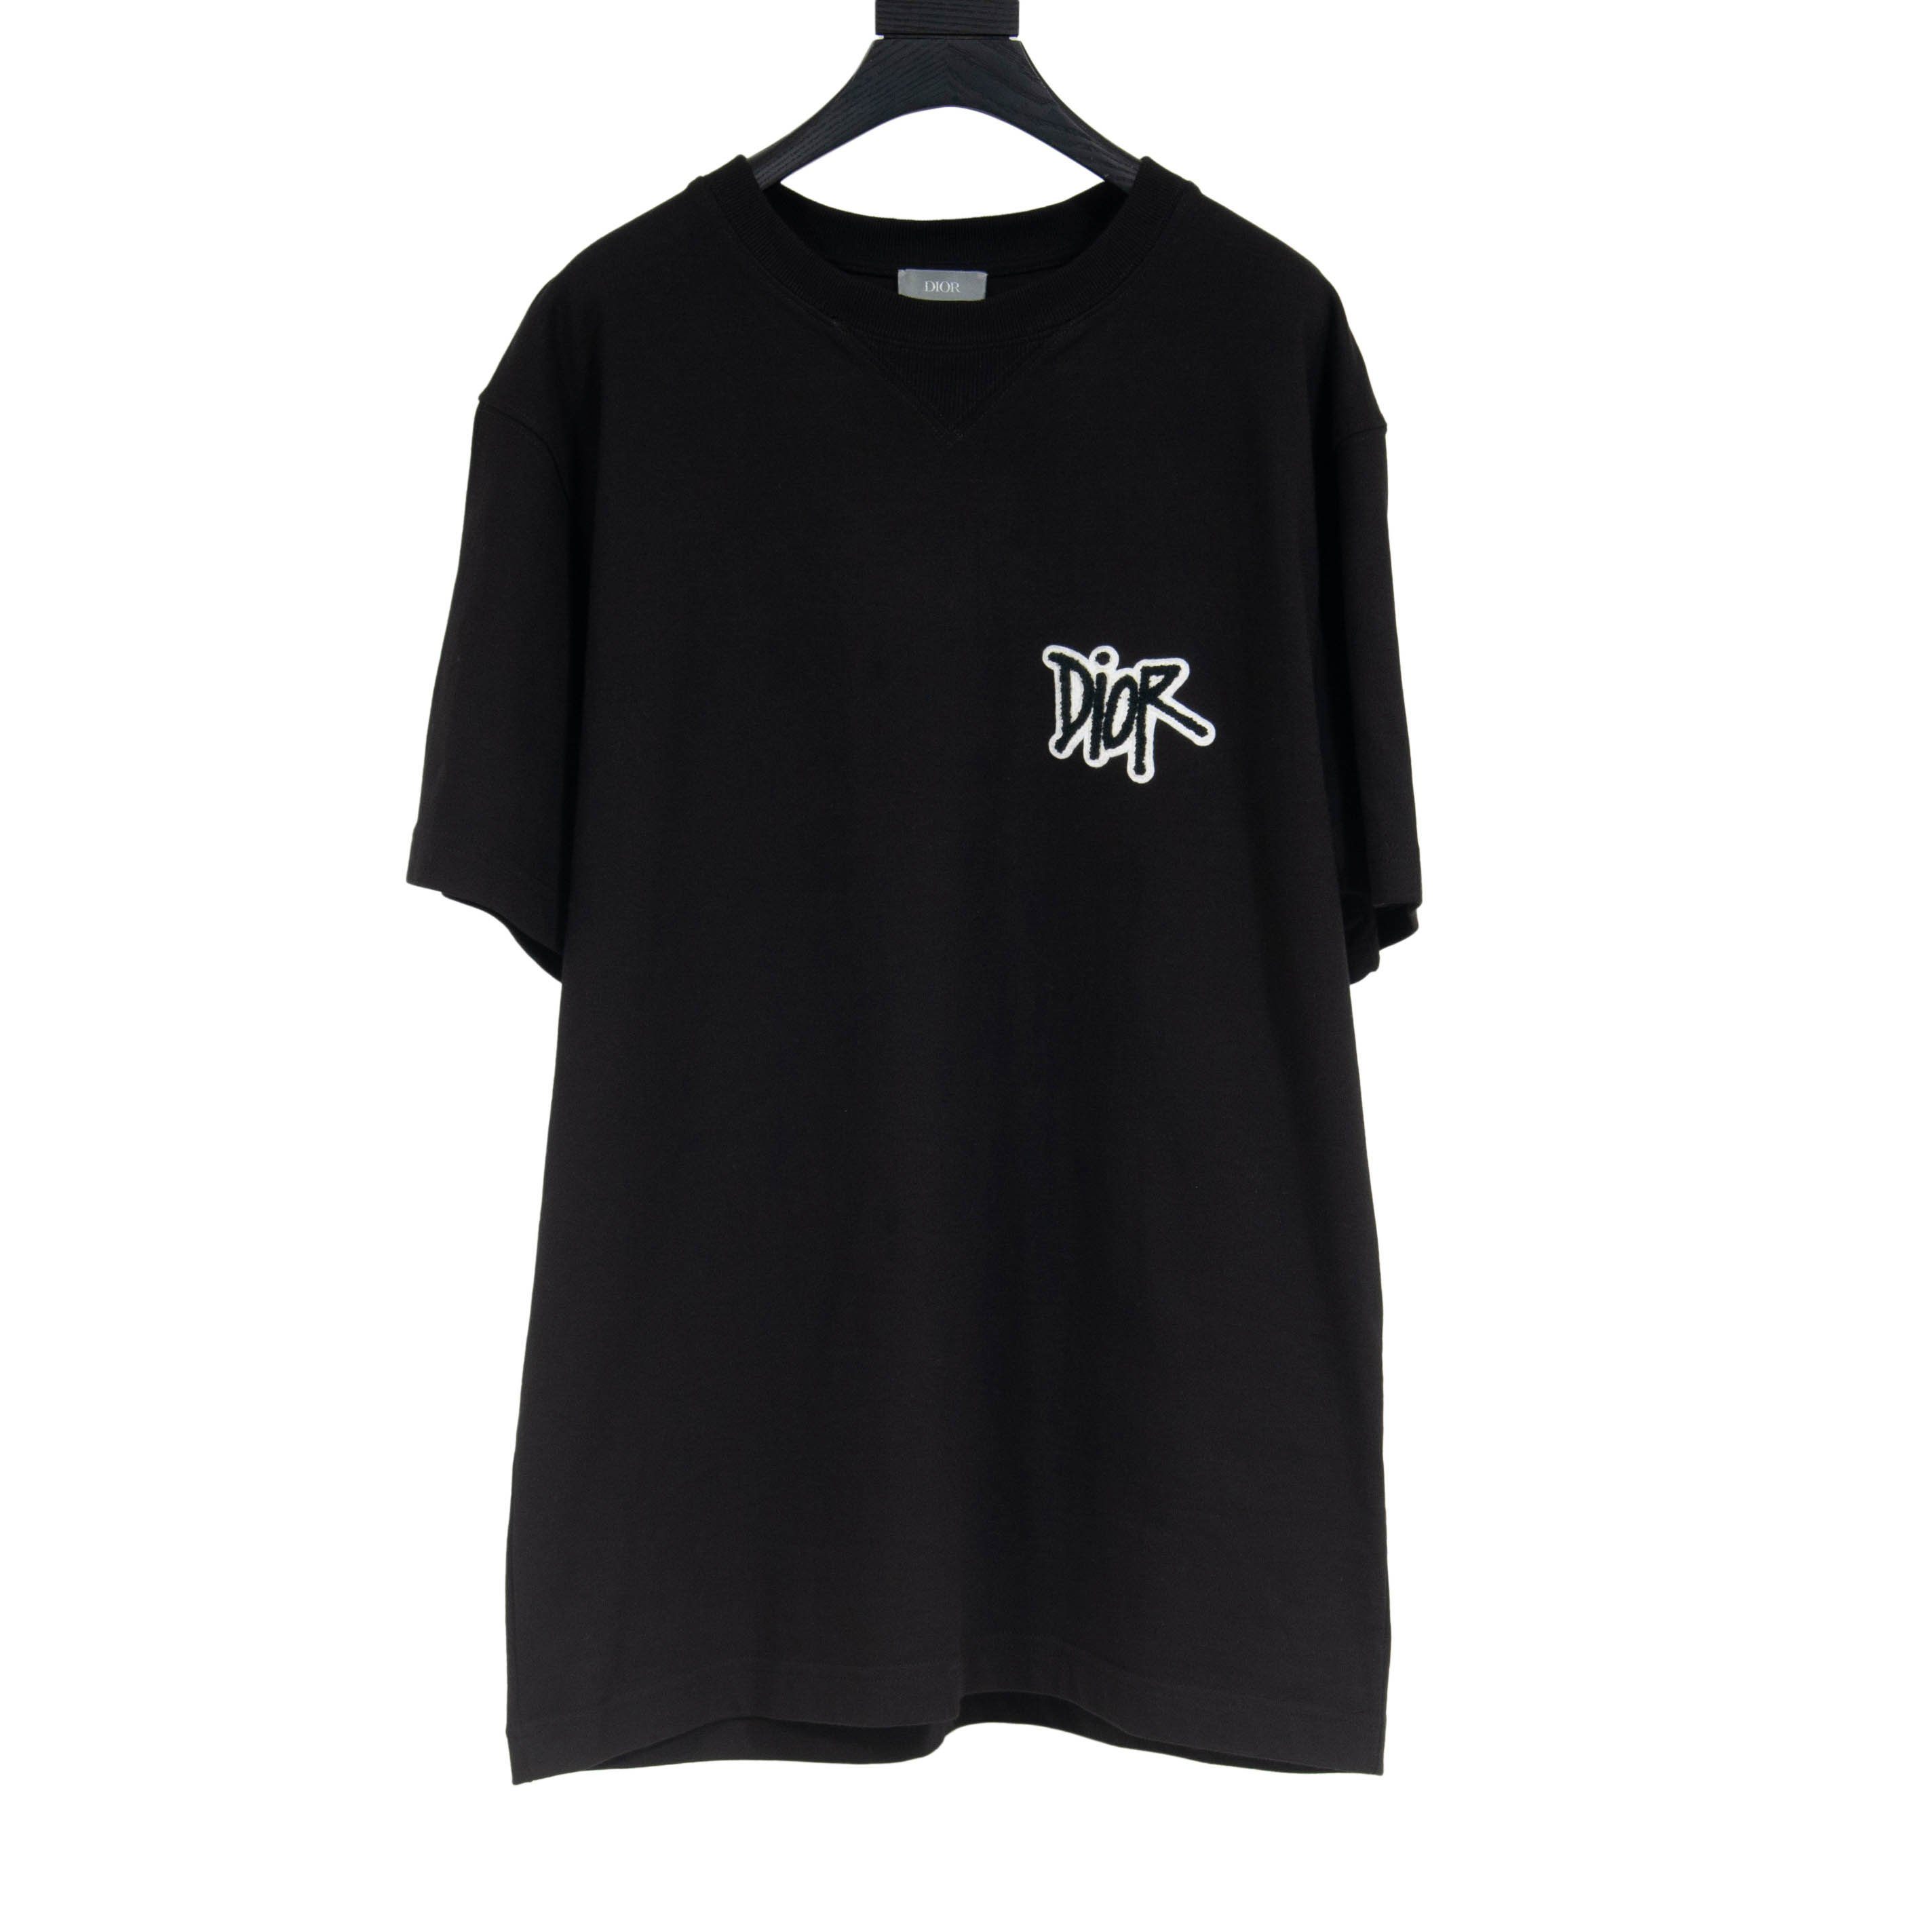 DIOR x STUSSY 750 I Want To Shock The World With Dior Embroidered Tshirt   eBay